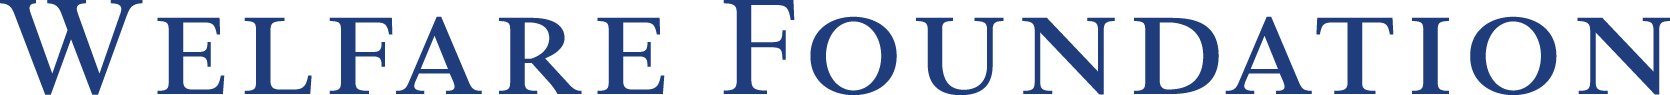 A logo for the Welfare Foundation in dark blue letters